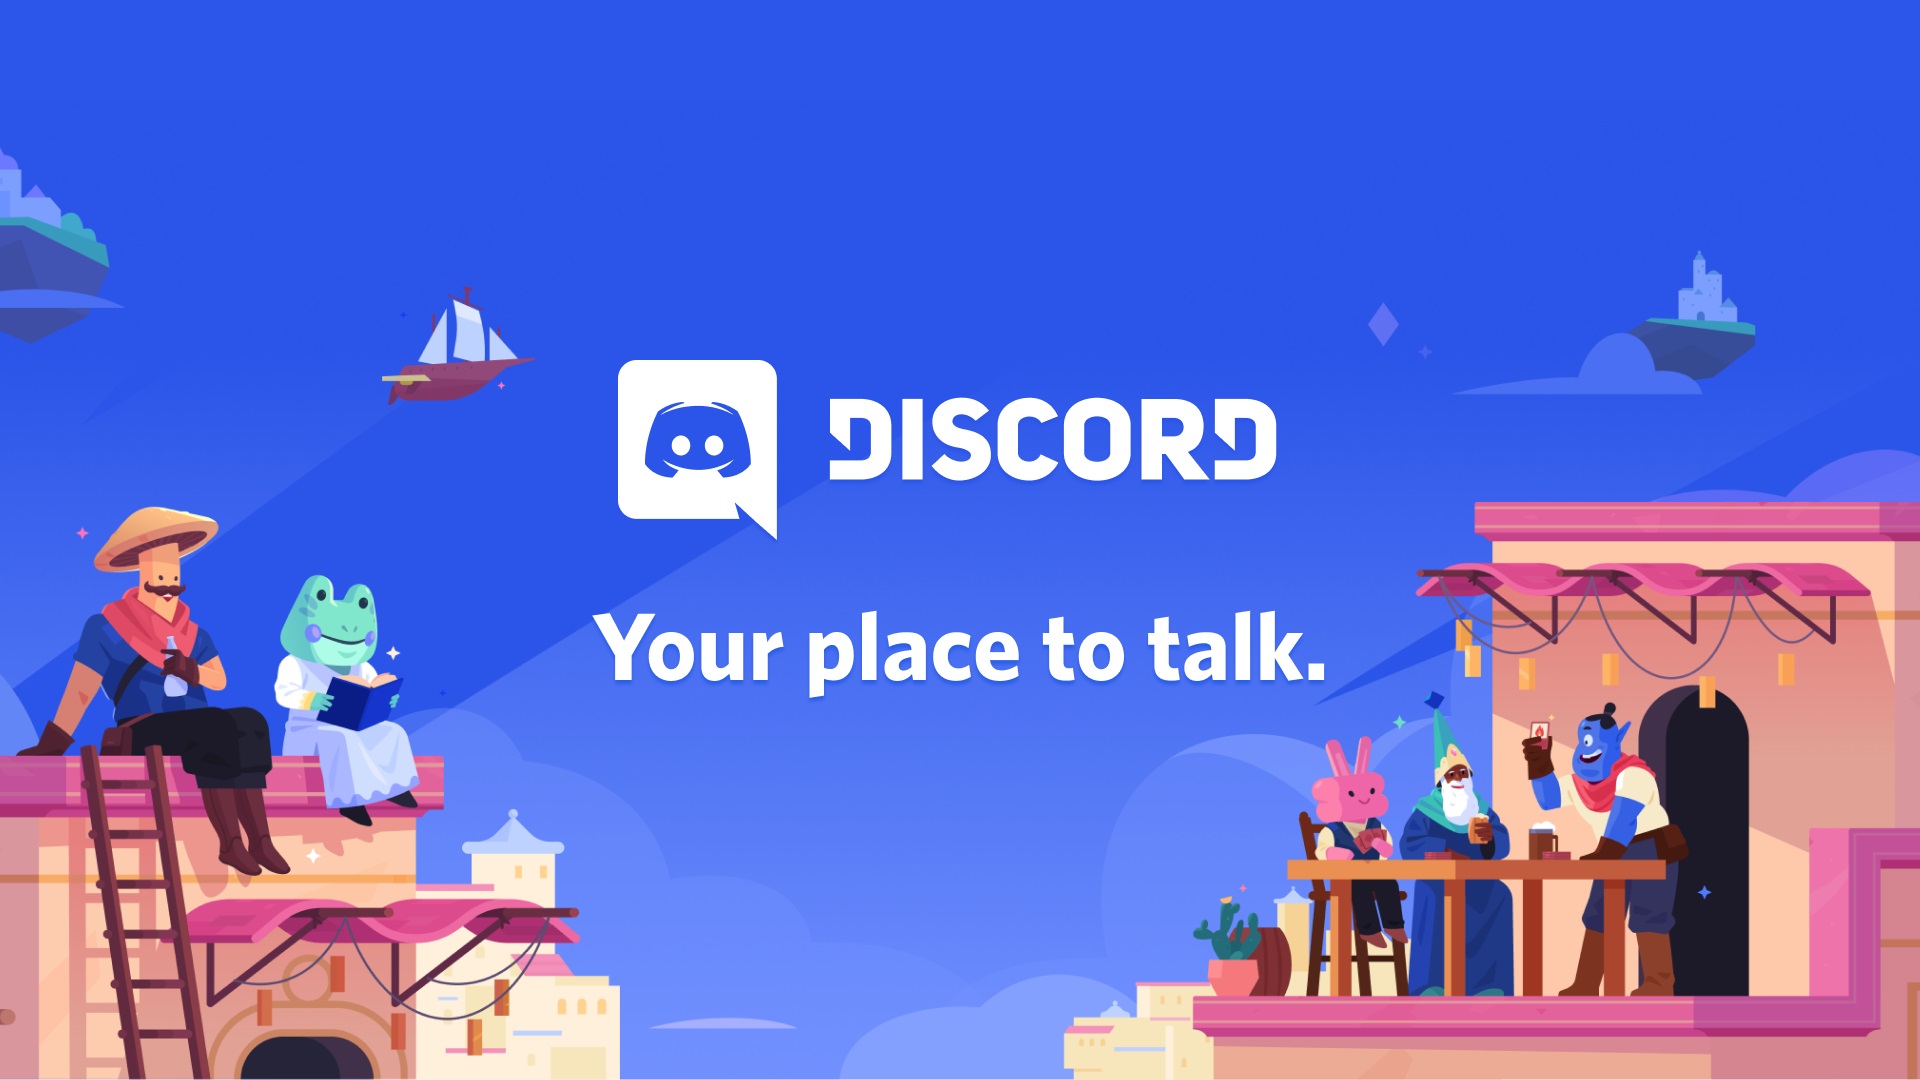 How Discord Has Changed Gaming  - No Gaming Friends, Just Real Friends